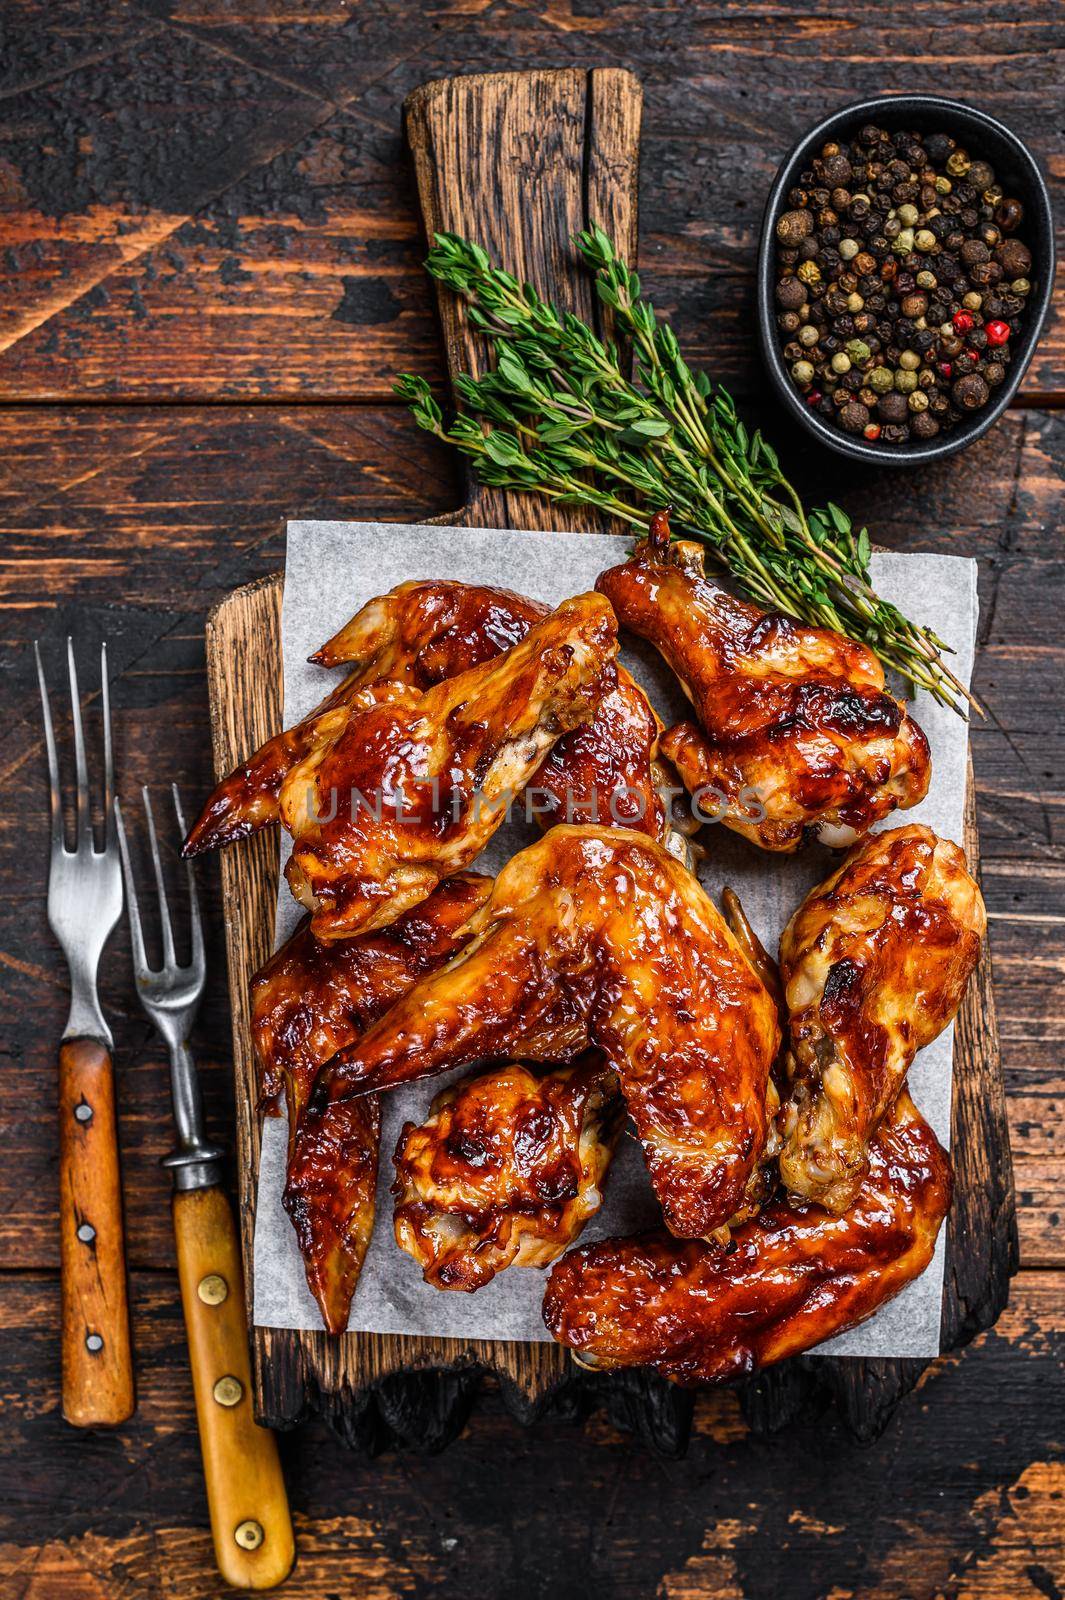 Baked Bbq chicken wings with dip sauce. Dark wooden background. Top view.